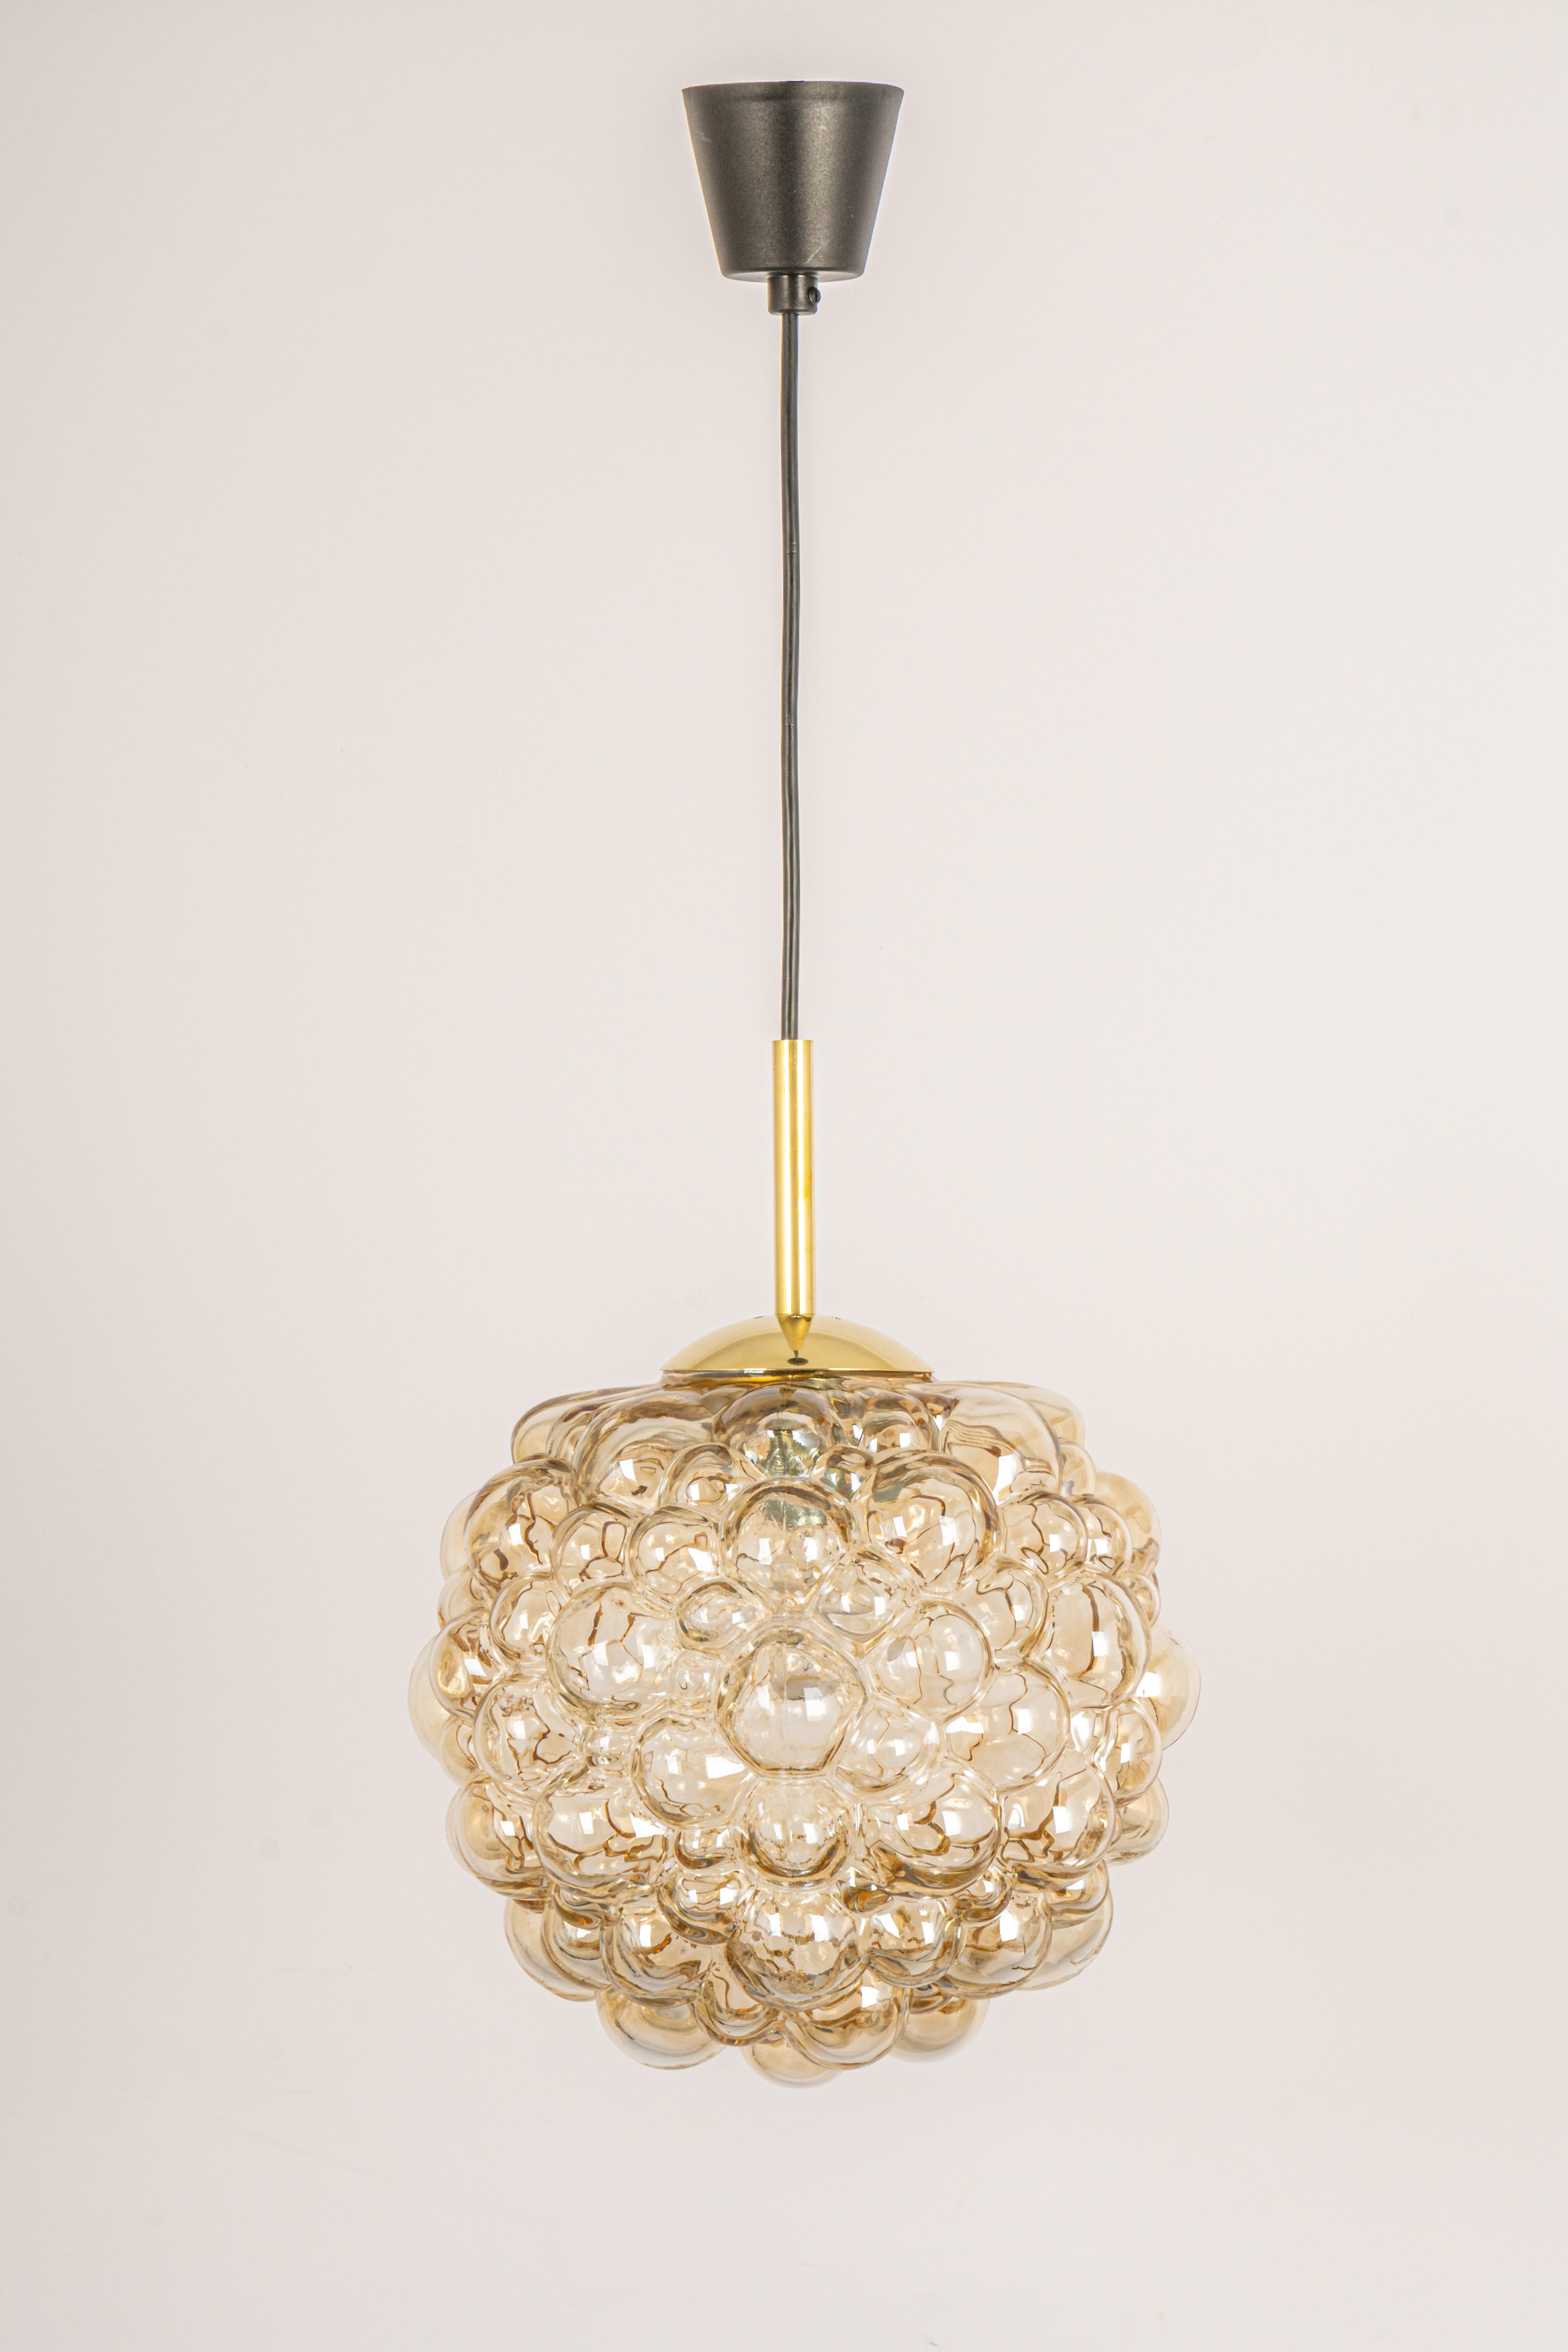 A large round with light smoke tone bubble glass pendant designed by Helena Tynell for Limburg, manufactured in Germany, circa 1970s

Sockets: It needs 1 x E27 standard bulb.
Light bulbs are not included. It is possible to install this fixture in